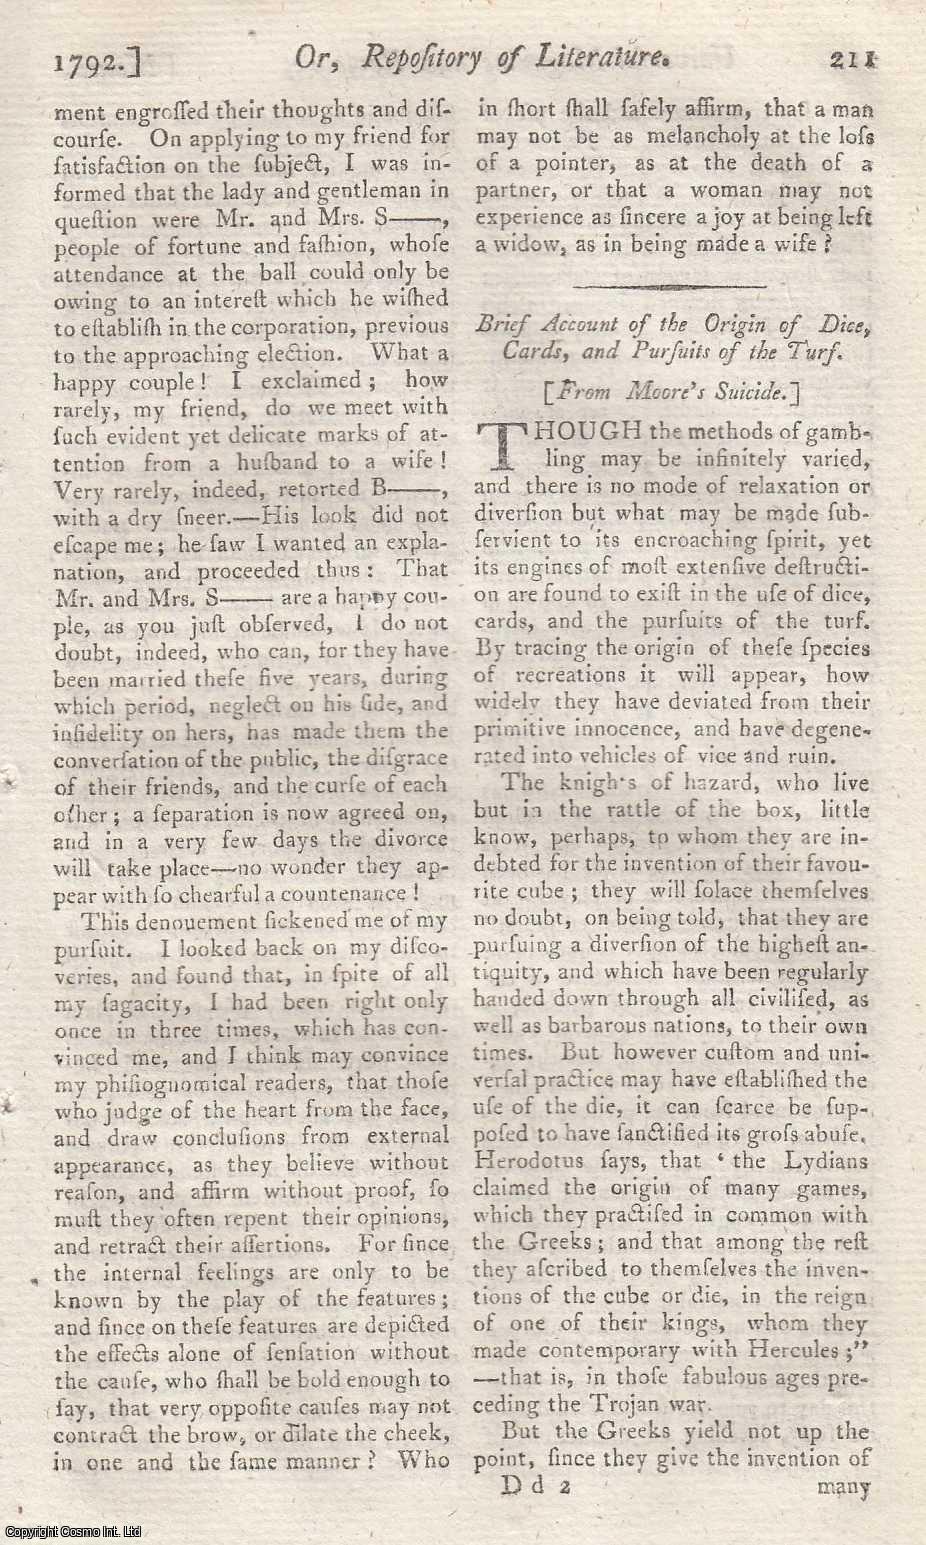 GAMBLING - Brief Account of the Origin of Dice, Cards, and Pursuits of the Turf. An original article from the Universal Magazine, 1792.